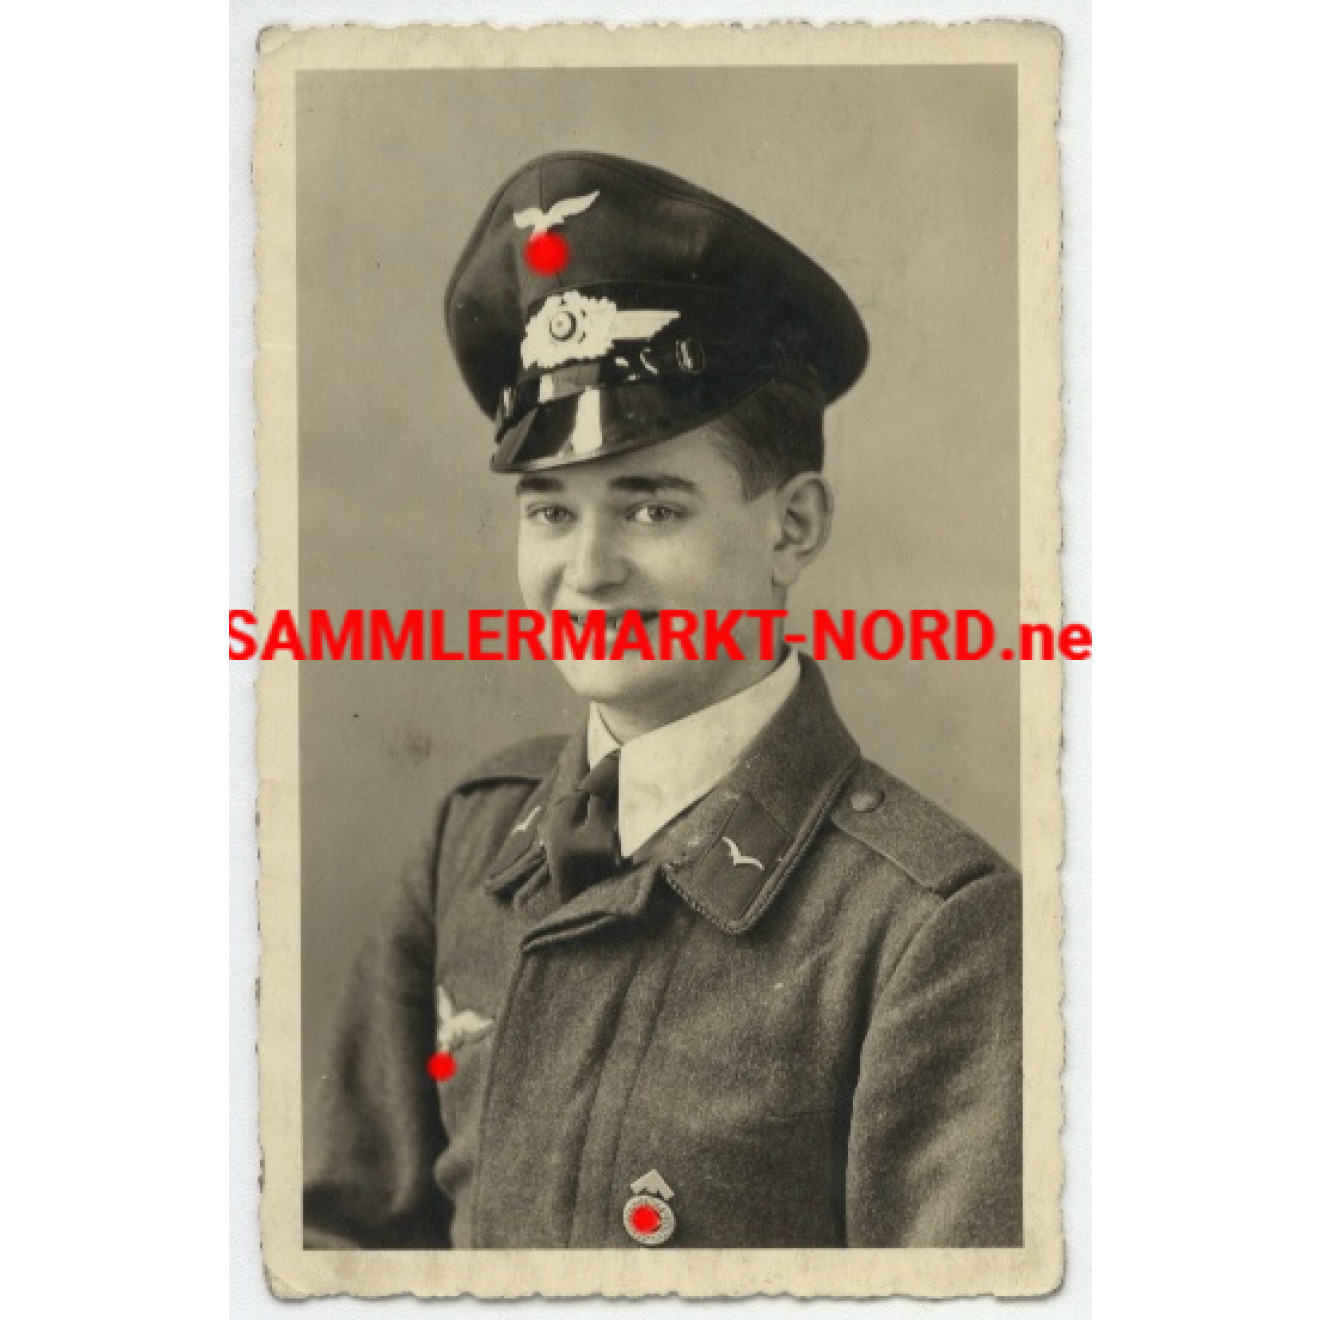 Kanonier of the Flak with HJ Achievement Badge